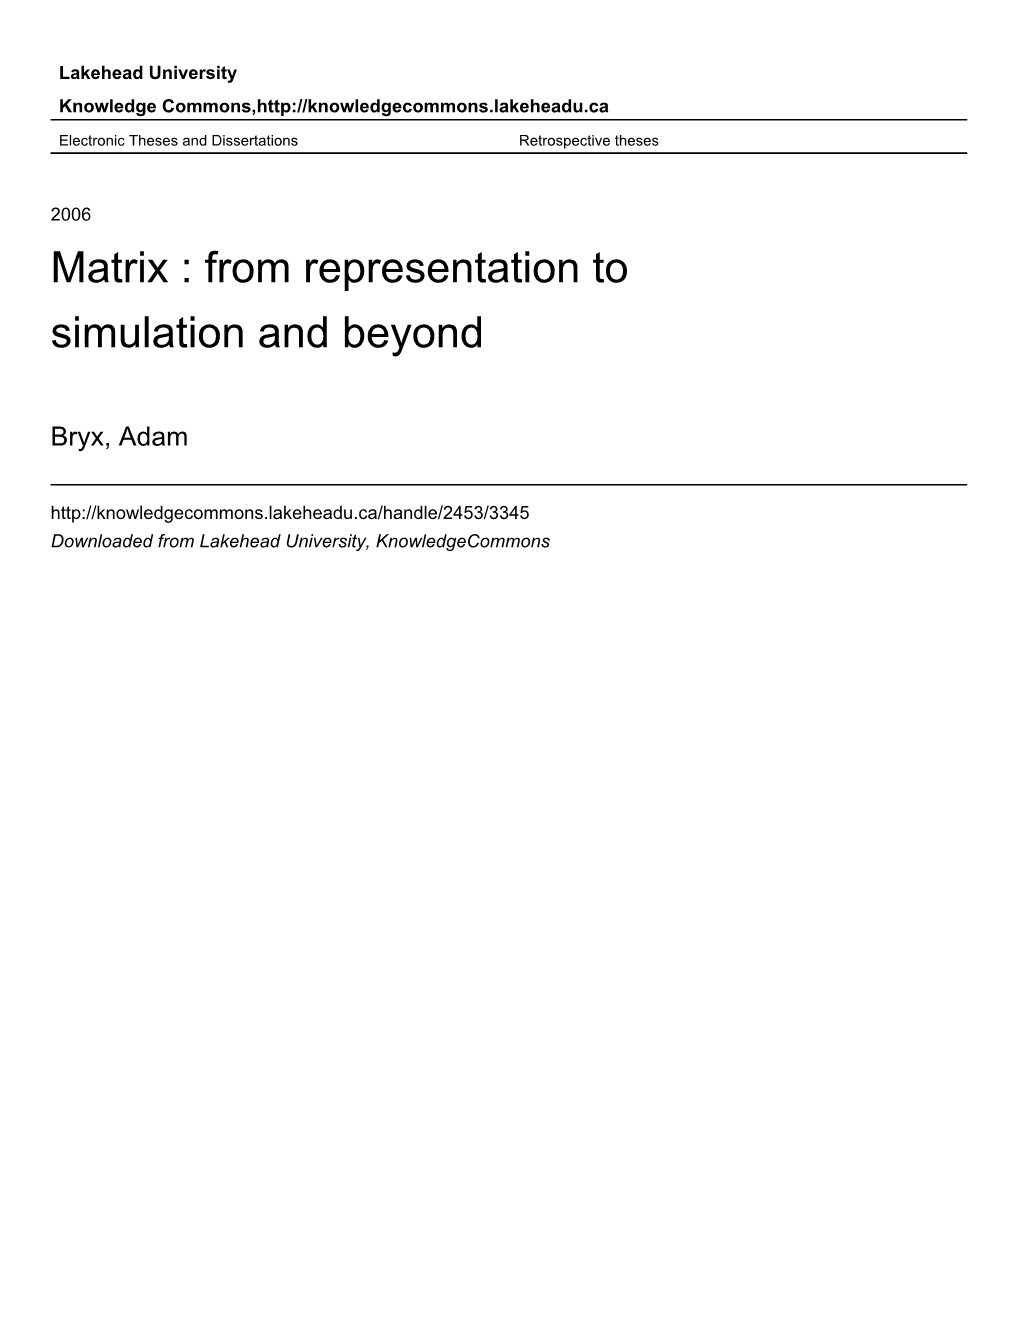 Matrix : from Representation to Simulation and Beyond